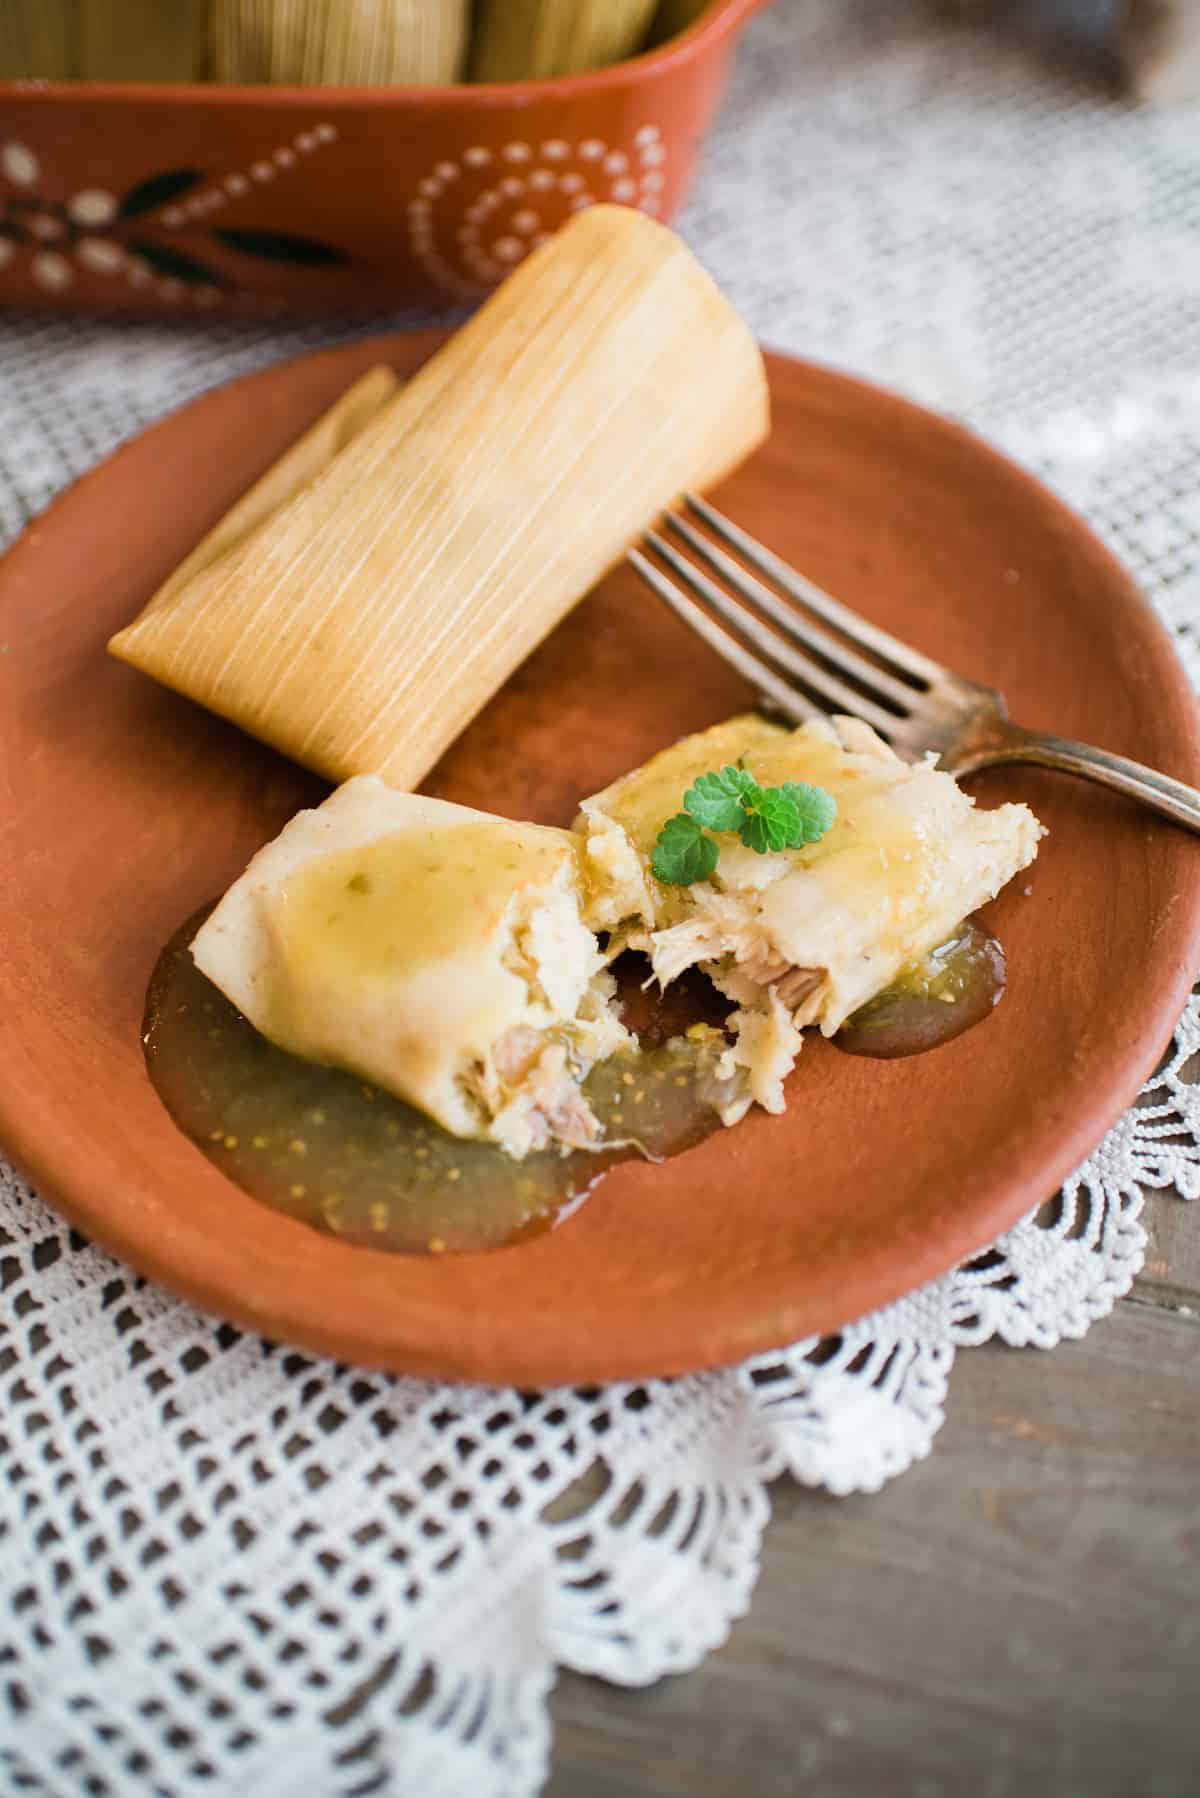 round terracotta plate with an unwrapped chicken tamale broken in half and drizzled with salsa verde with another tamale still in the husk.